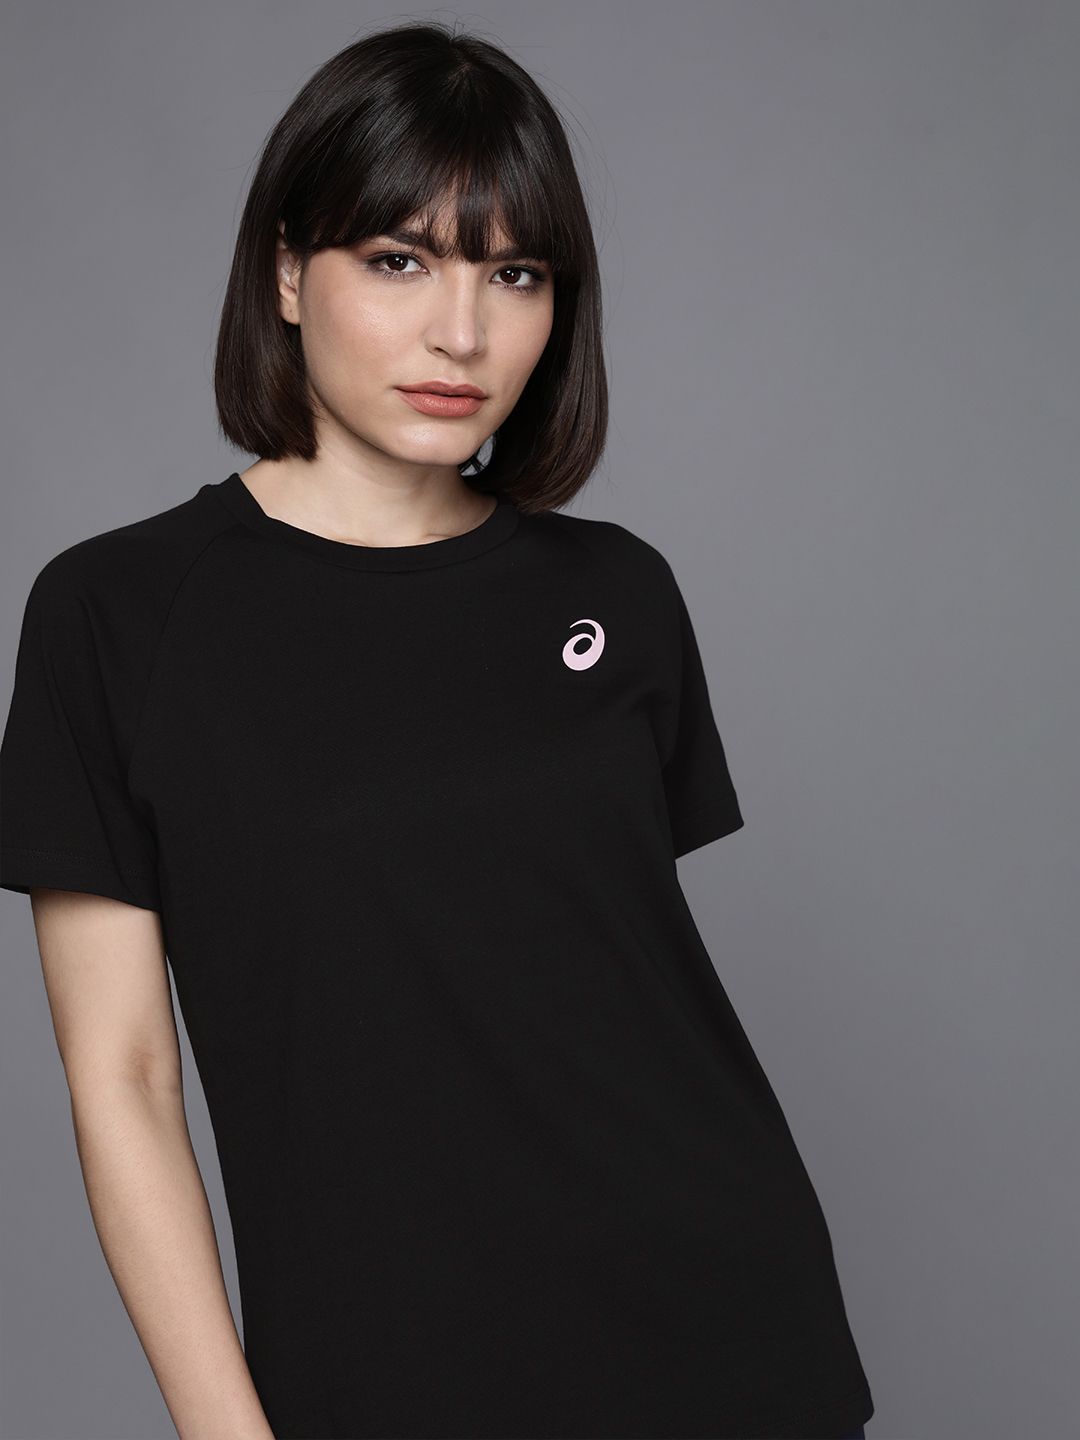 ASICS Women Black Solid Pure Cotton T-shirt Price in India